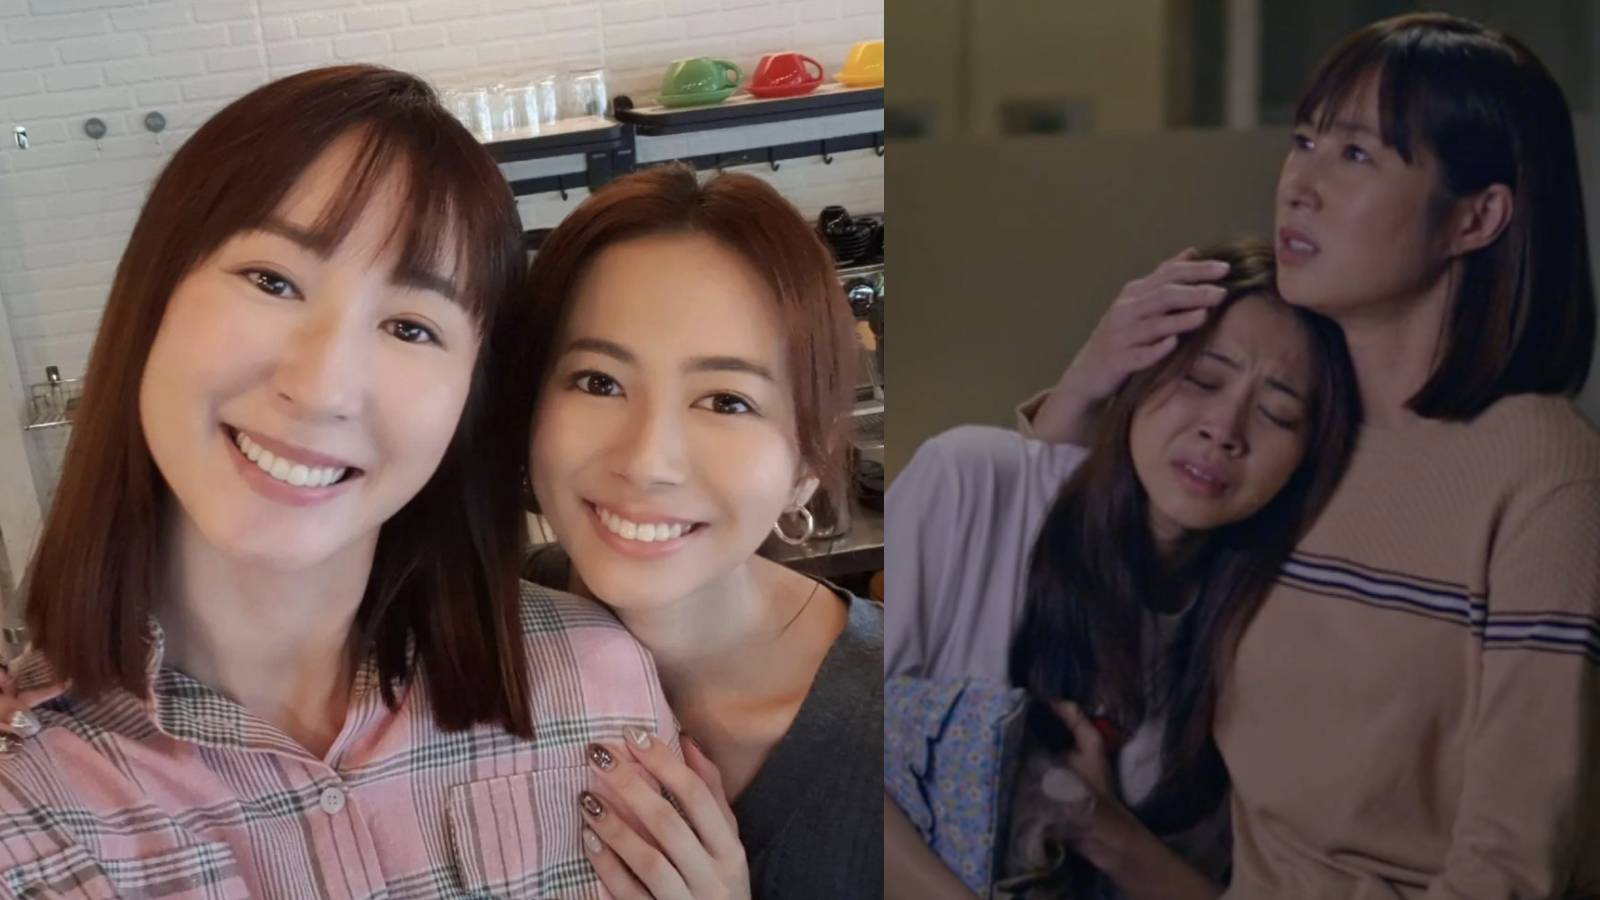 Paige Chua Leaves Encouraging IG Message For Bonnie Loo’s Character In The Heartland Hero; Netizens Say Bonnie's Scenes Were “Heartbreaking"